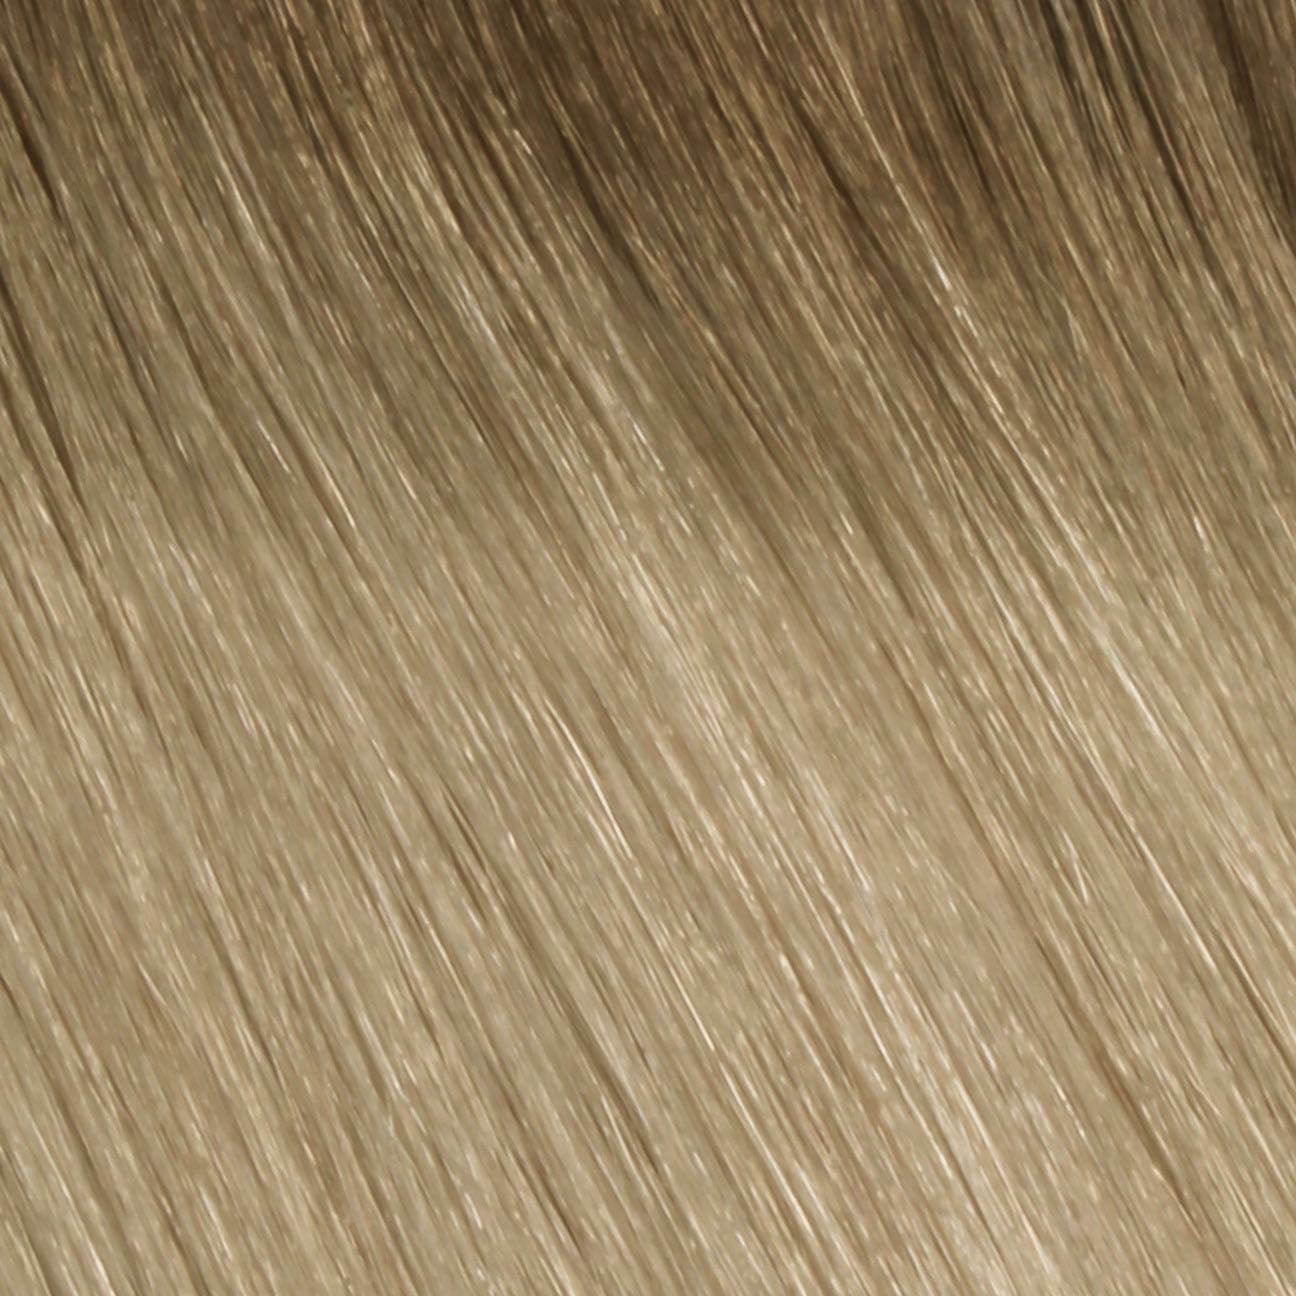 Nano Bonds 18 Inches - SWAY Hair Extensions Rooted-Hollywood-Blonde-R8-18-613 Ultra-fine, invisible bonds for a flawless, natural look. 100% Remy Human hair, lightweight and versatile. Reusable and perfect for individual or salon use.